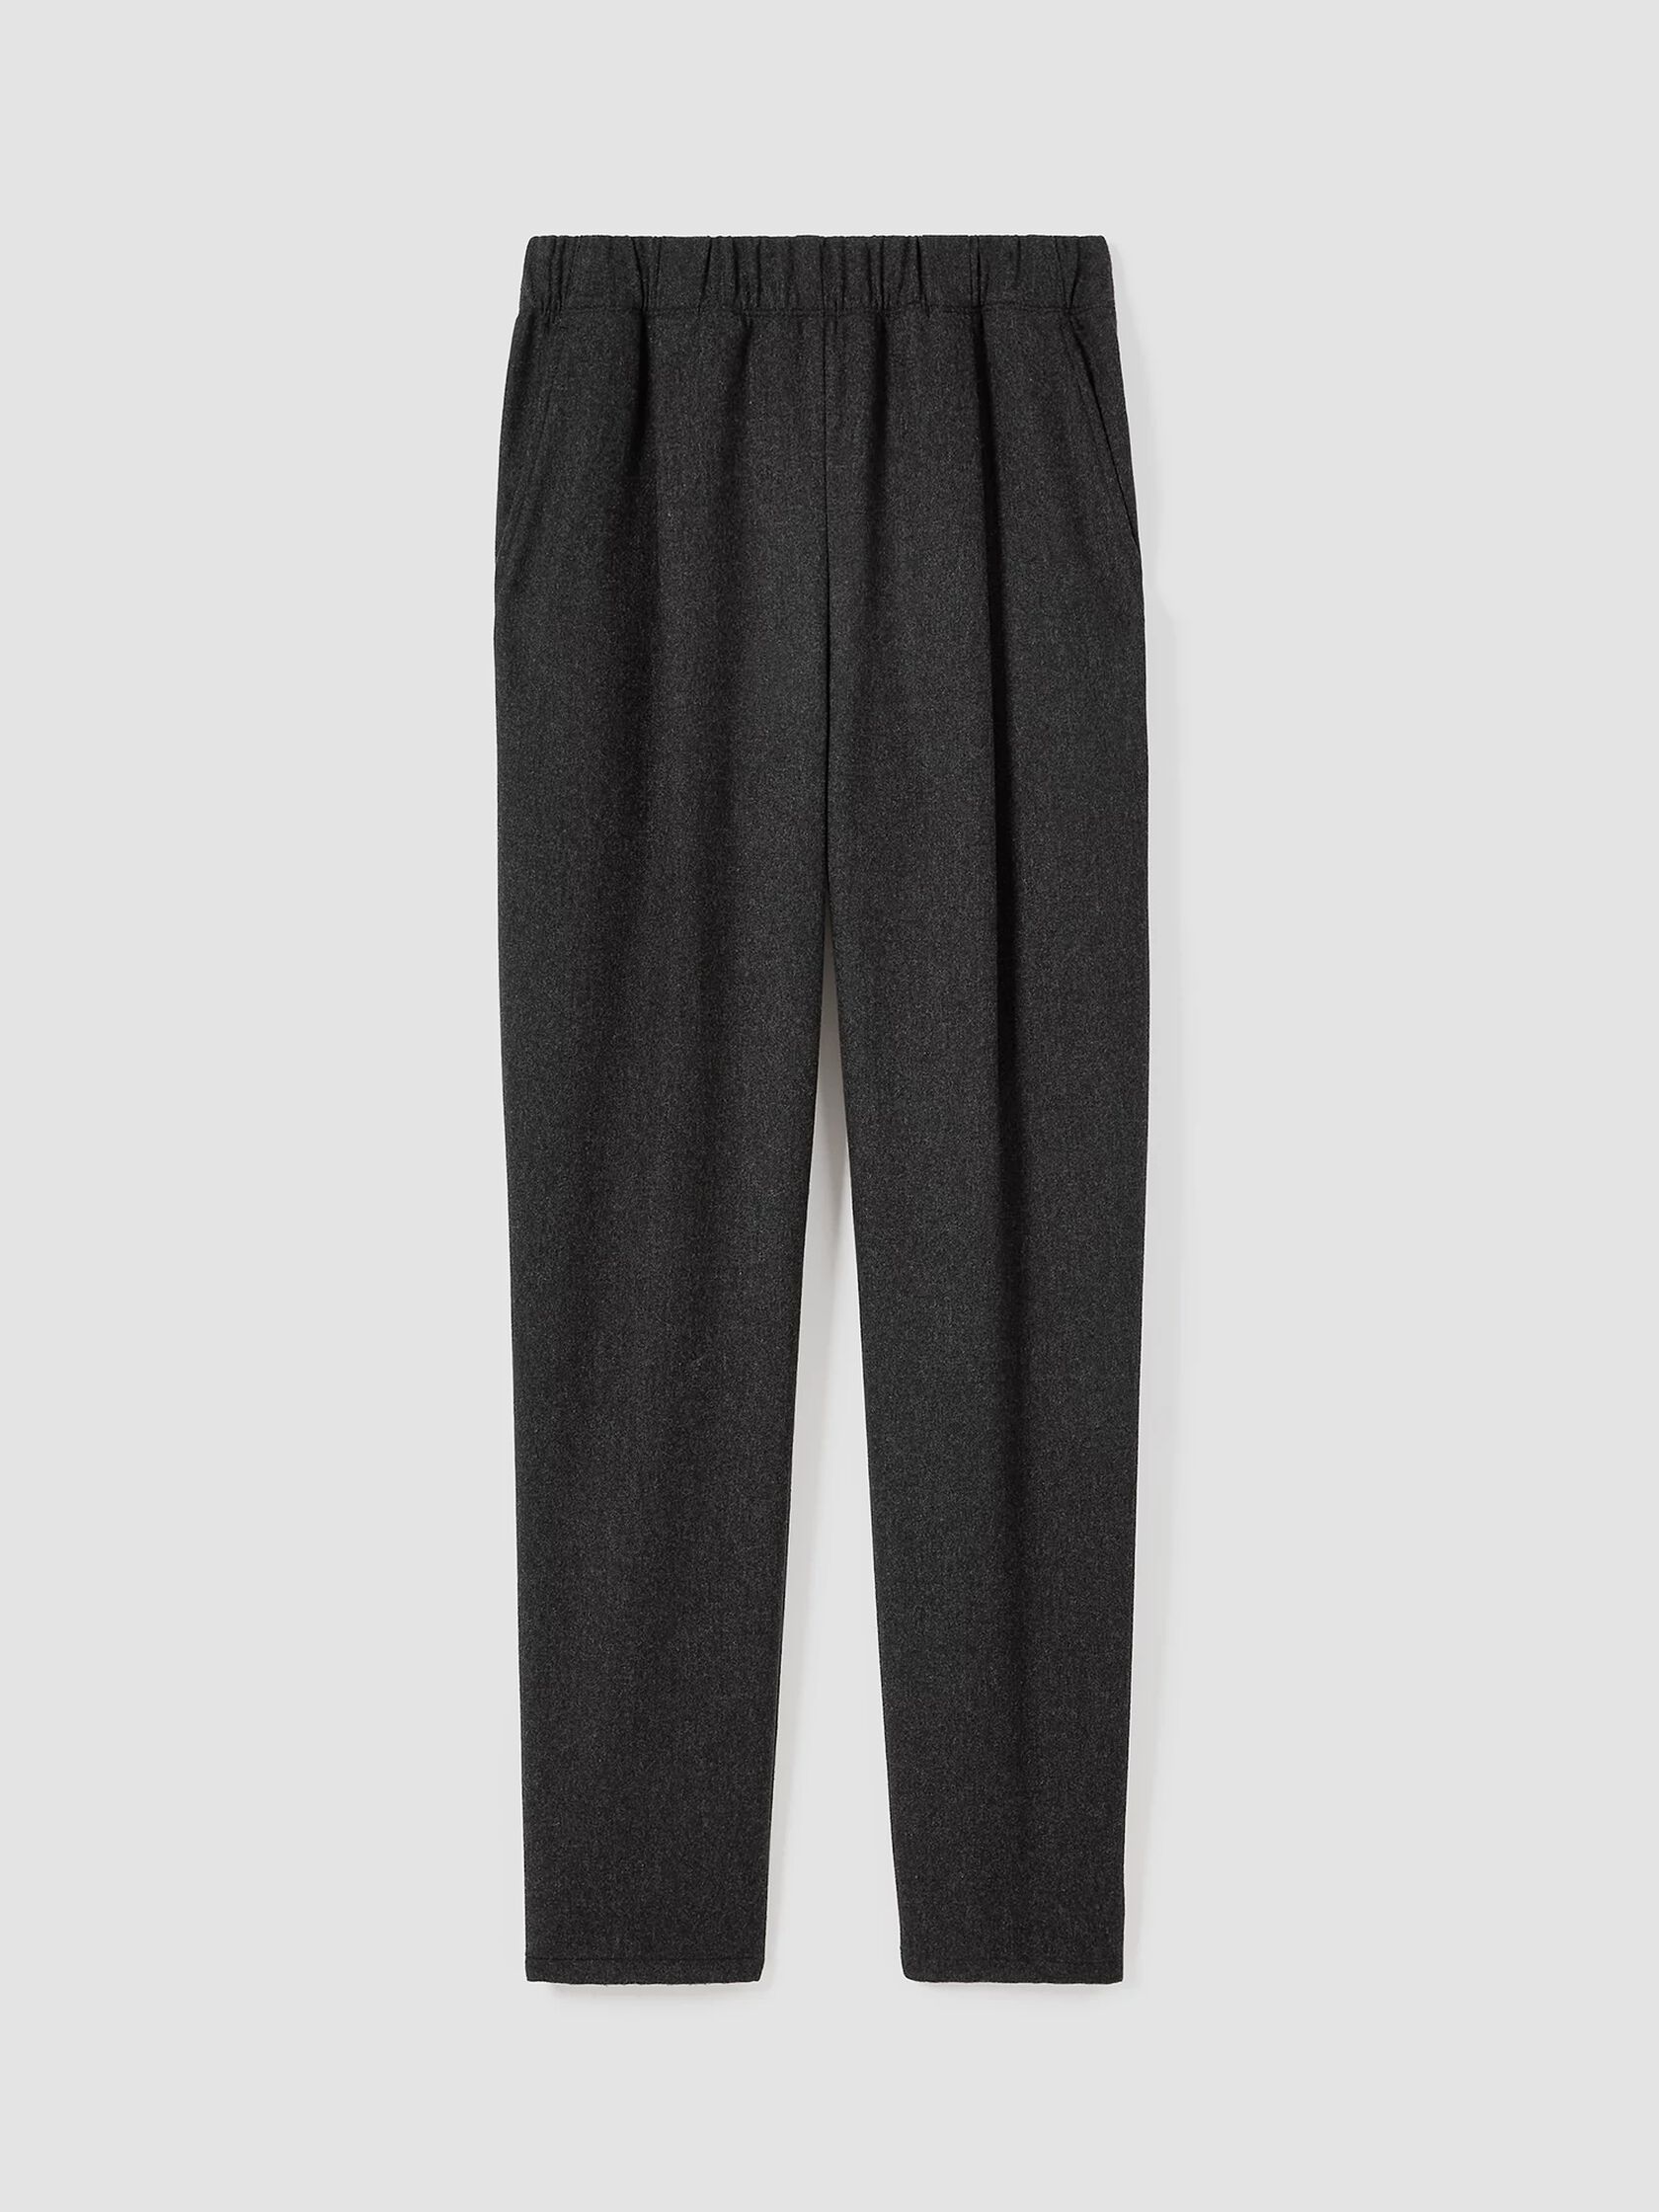 Wool Double-Face Pleated Tapered Pants